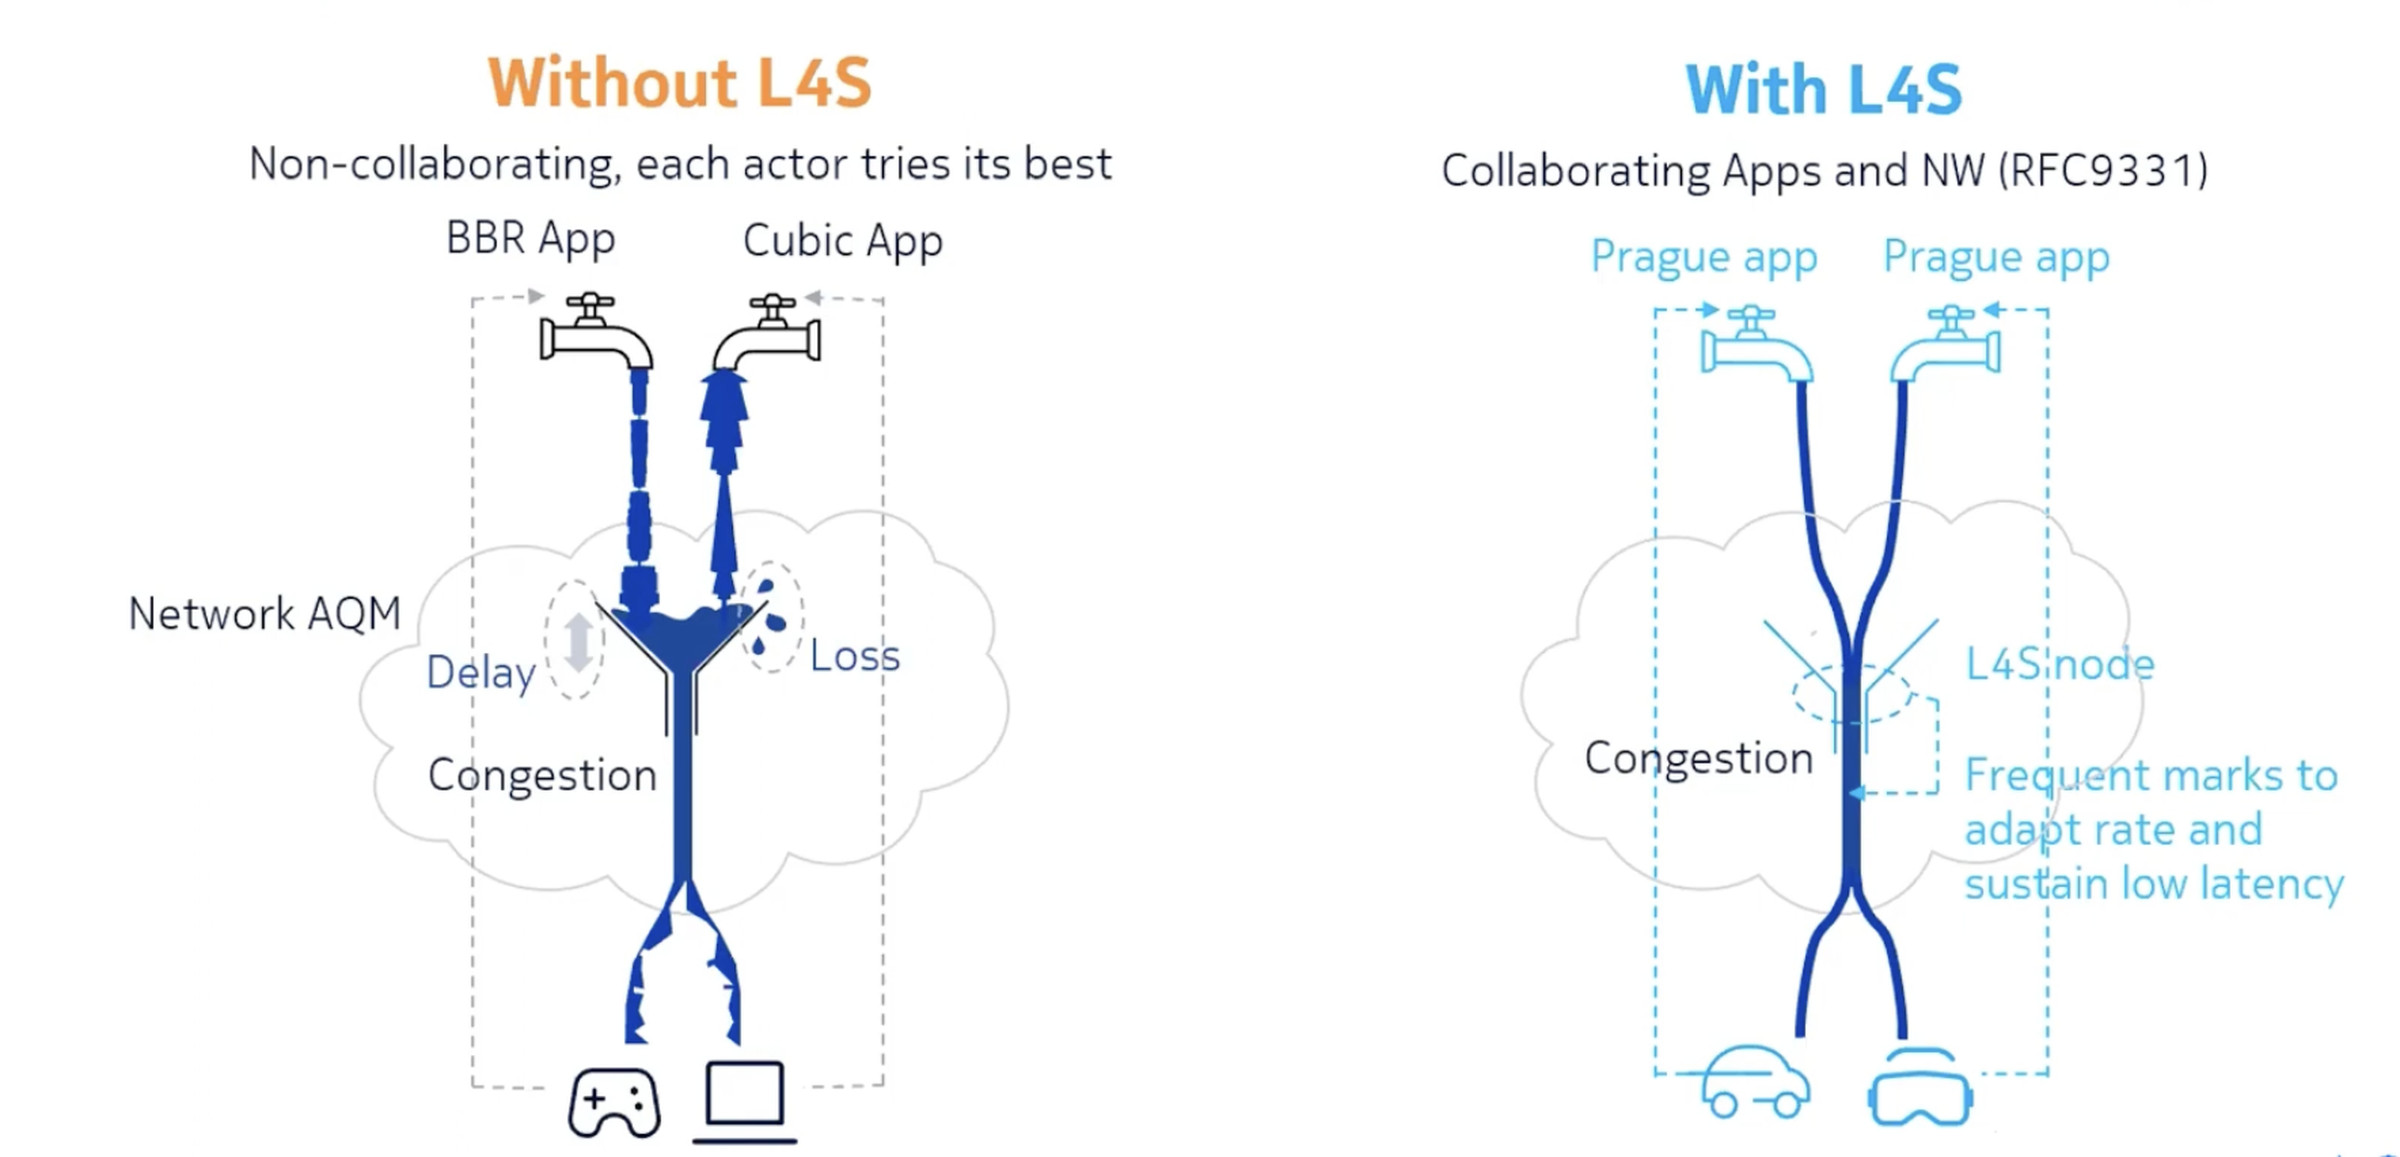 Image showing two sets of two faucets pouring water toward devices. On the side labeled “without L4S,” the streams go through a funnel and come out unevenly. On the side labeled “with L4S,” the streams are neat and smooth.